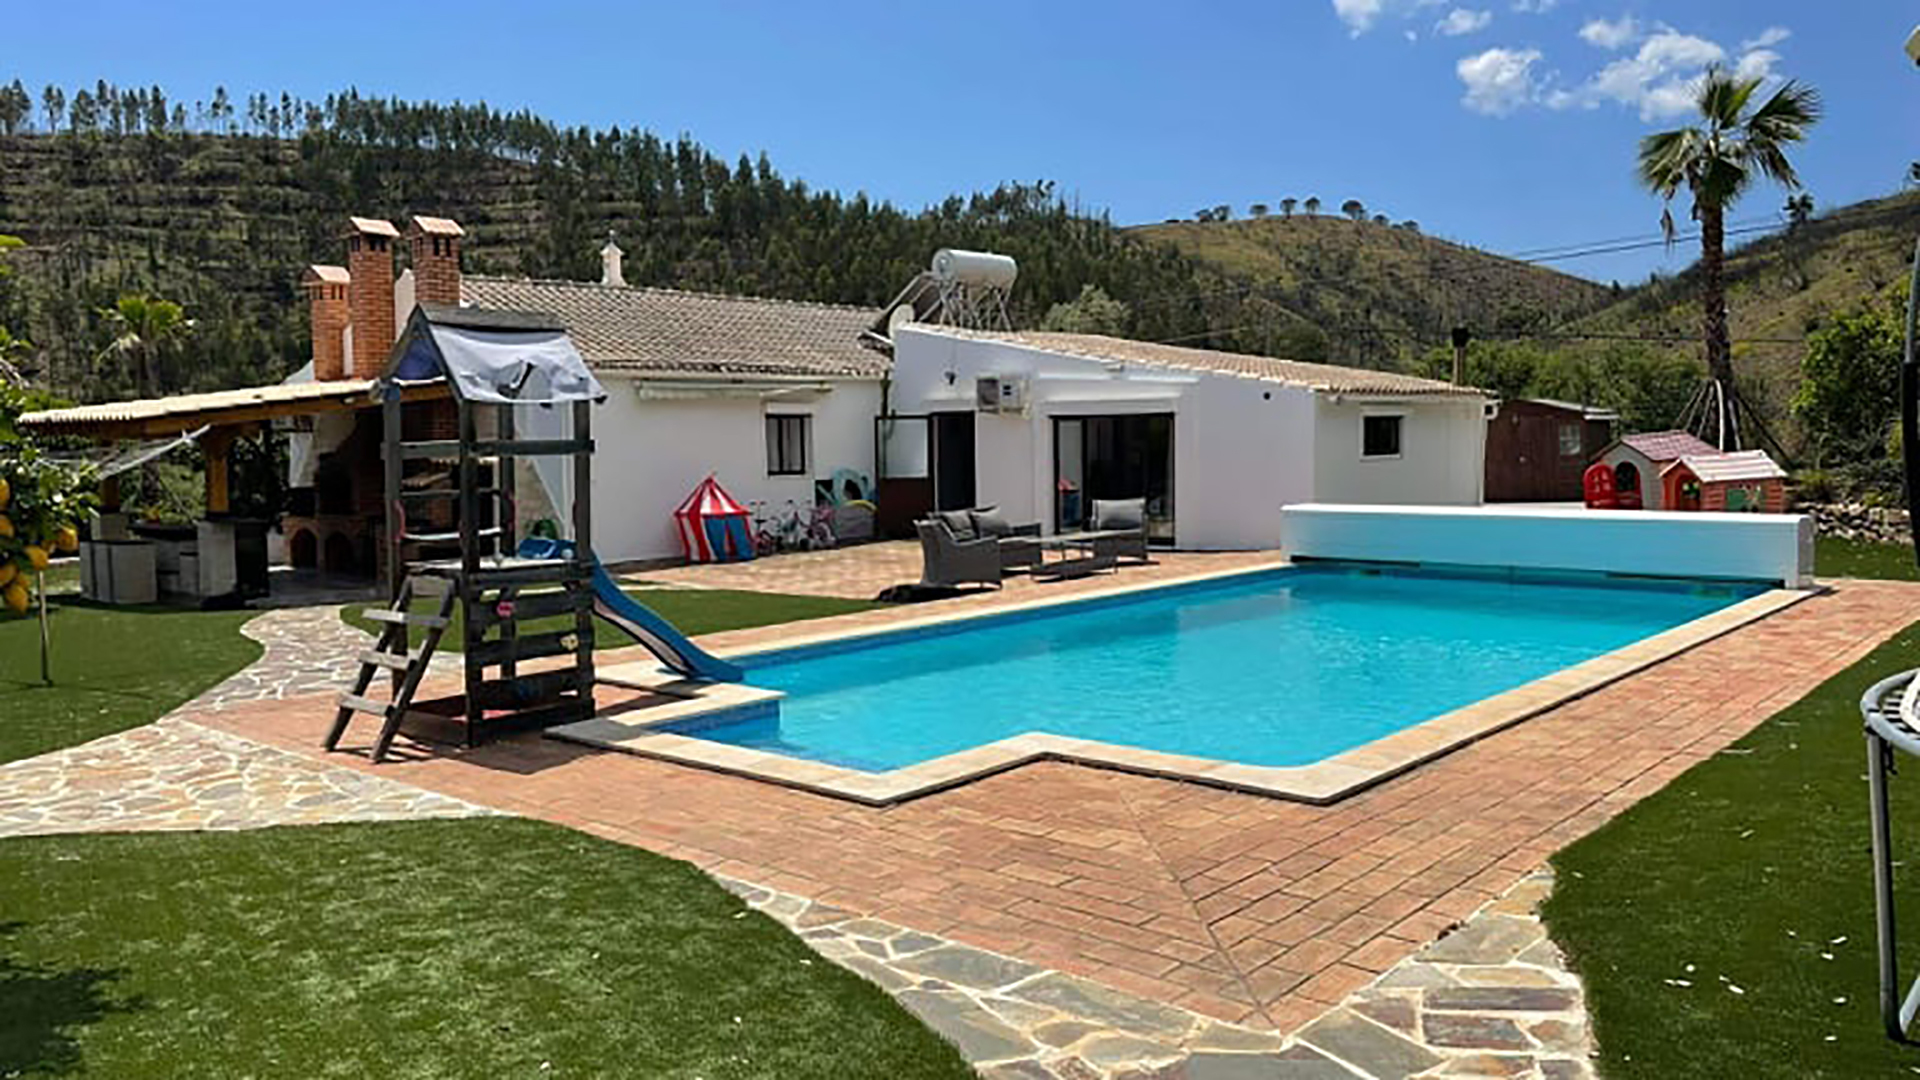 2+1 bedroom farmhouse with large pool in quiet surroundings, Marmelete, Monchique | LG1925 This farmhouse with 2+1 bedrooms and large pool is situated on a large plot with many fruit trees and quiet surroundings of Marmelete, with only one distant neighbour. 